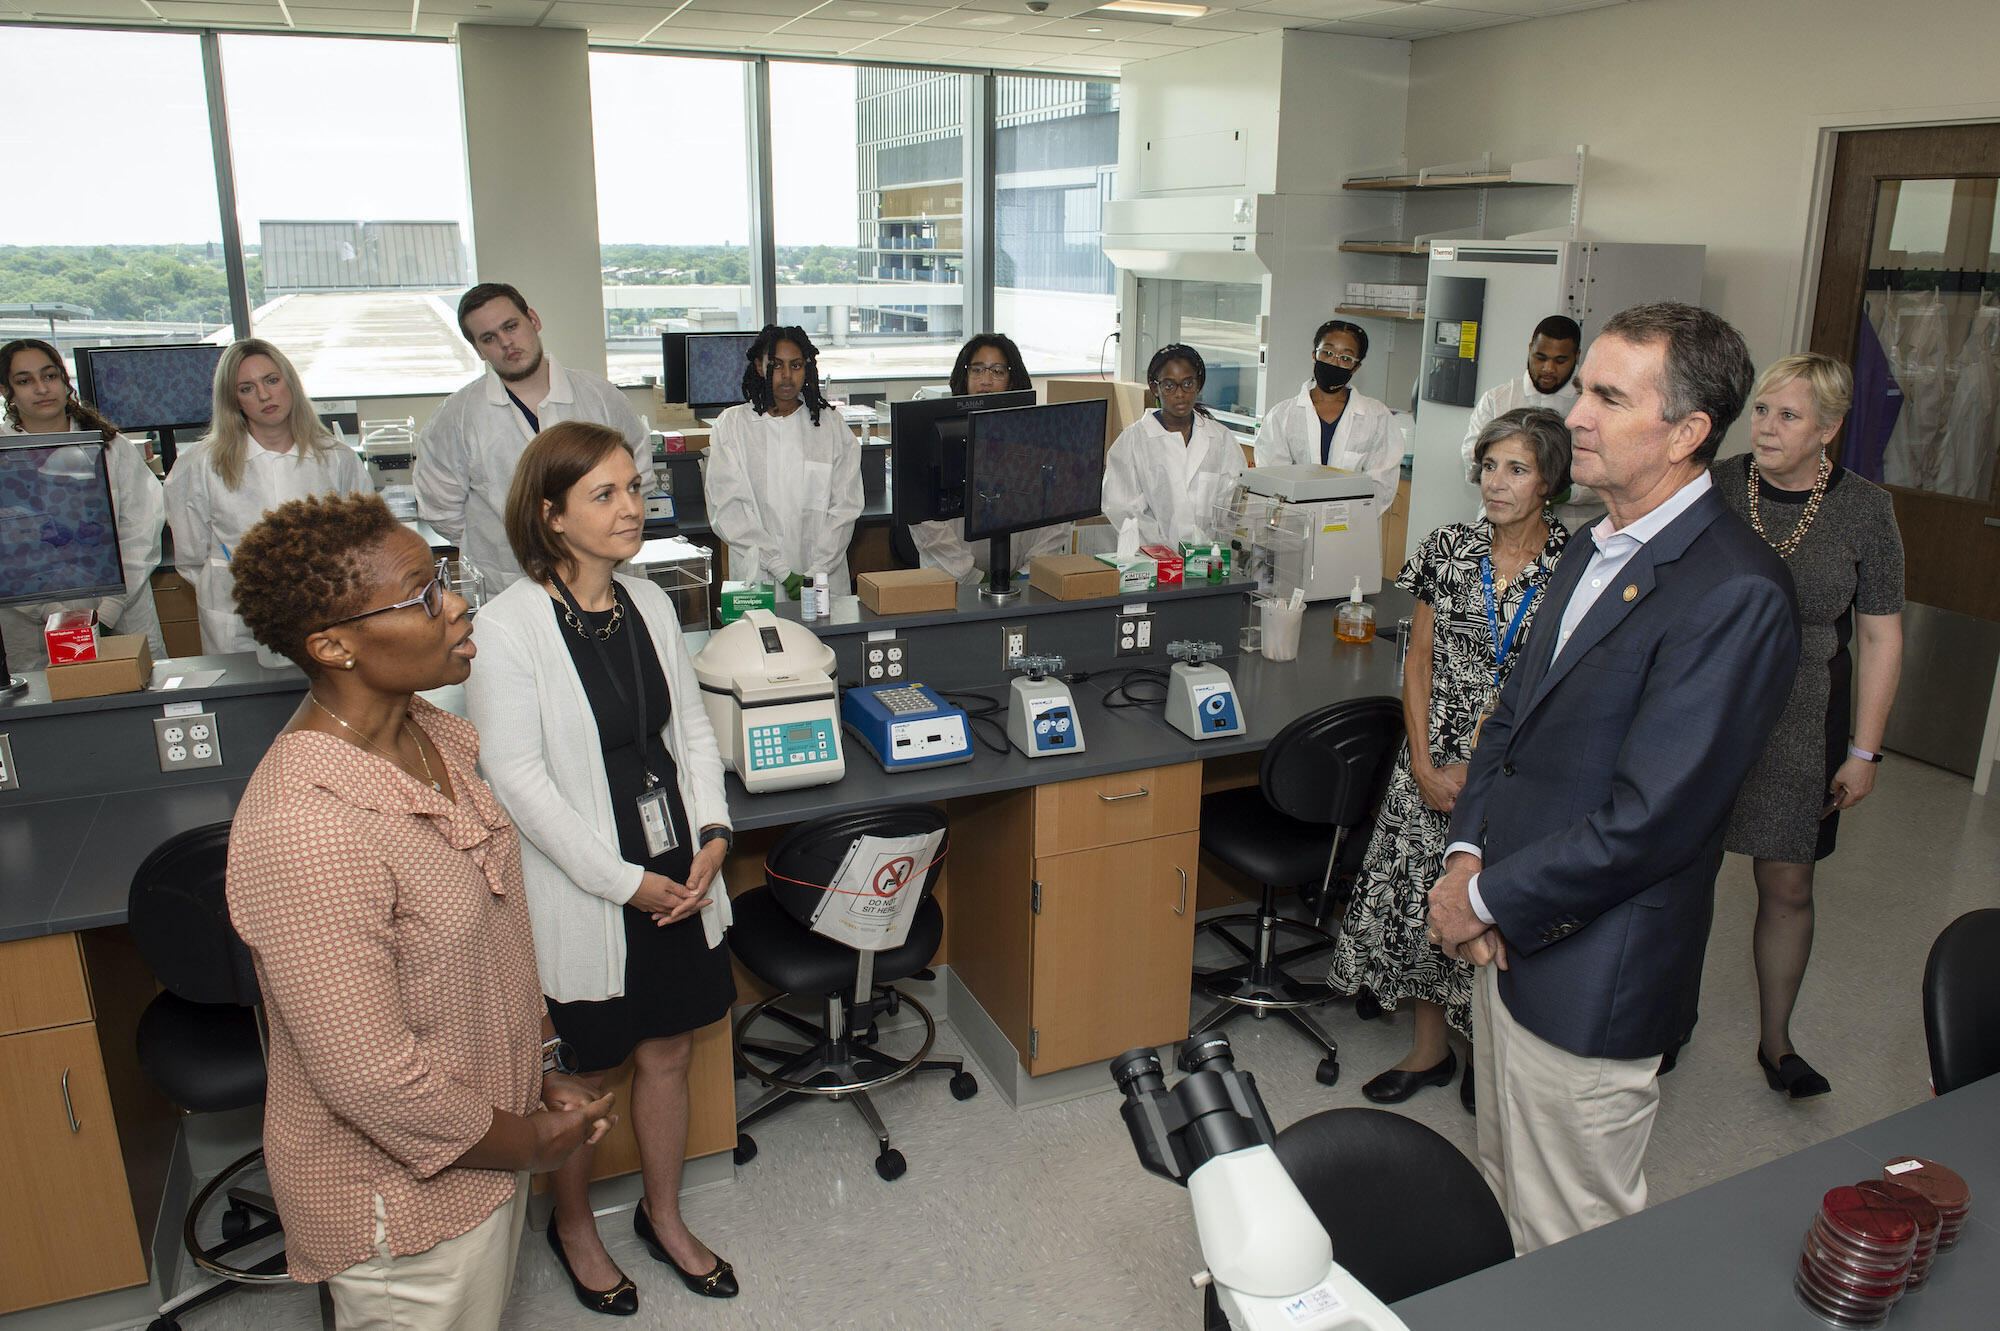 Students look on in the background as (foreground from left) Jenica Harrison, Ph.D., and Melissa Jamerson, Ph.D., professors in the Department of Medical Laboratory Sciences, talk with Teresa Nadder, Ph.D., the department's chair, Virginia Gov. Ralph Northam, M.D., and Susan Parish, Ph.D., dean of the College of Health Professions. 